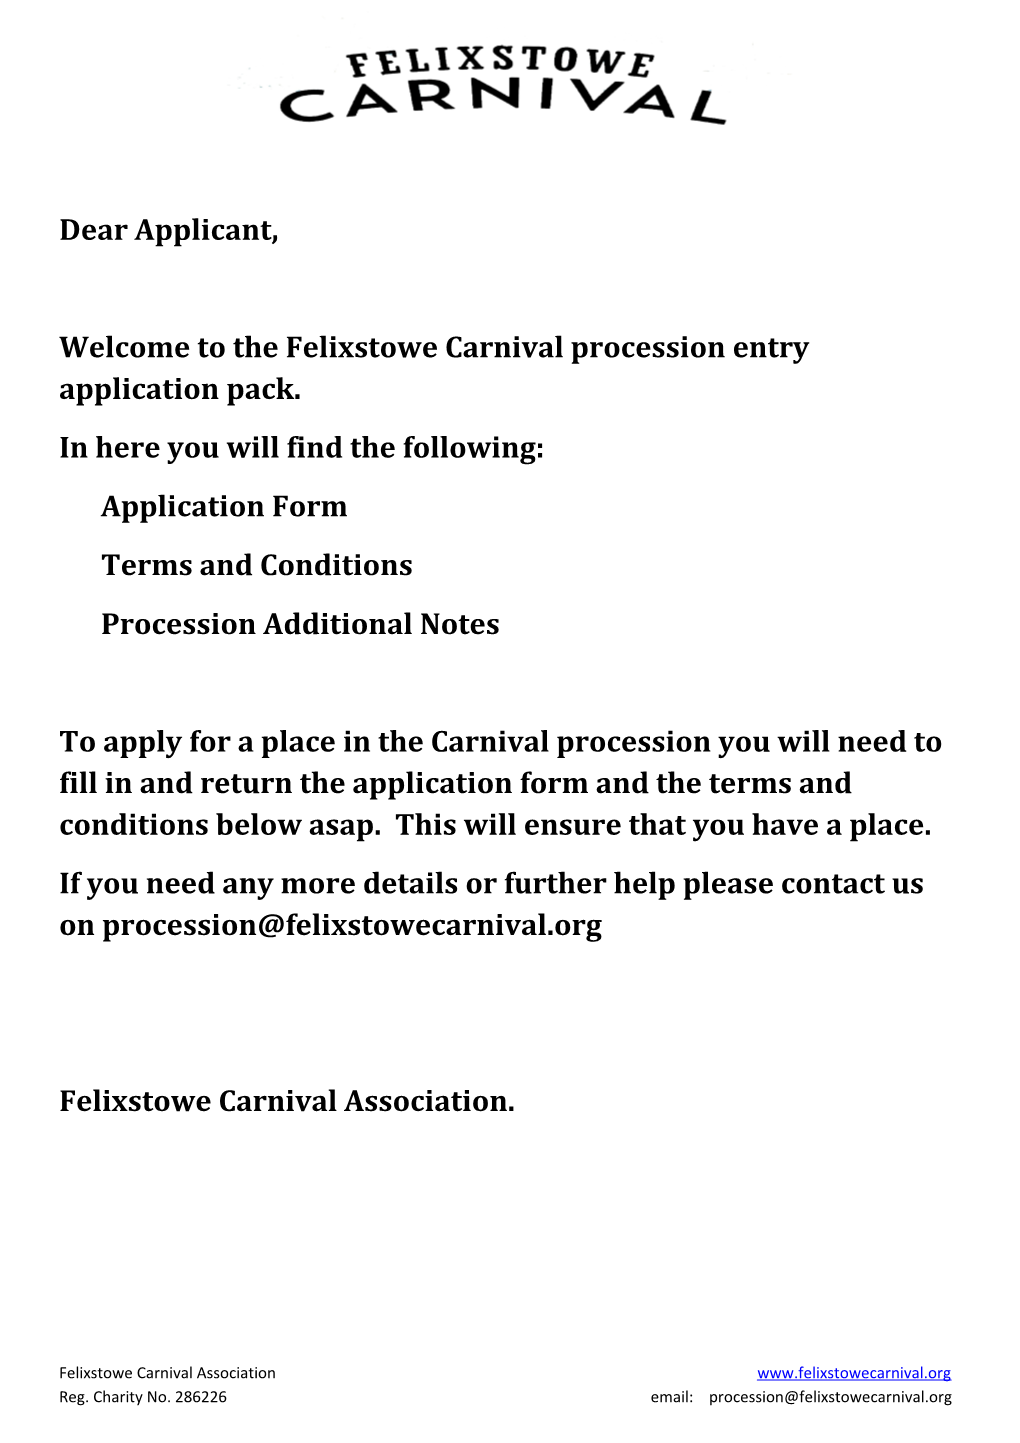 Welcome to the Felixstowe Carnival Procession Entry Application Pack